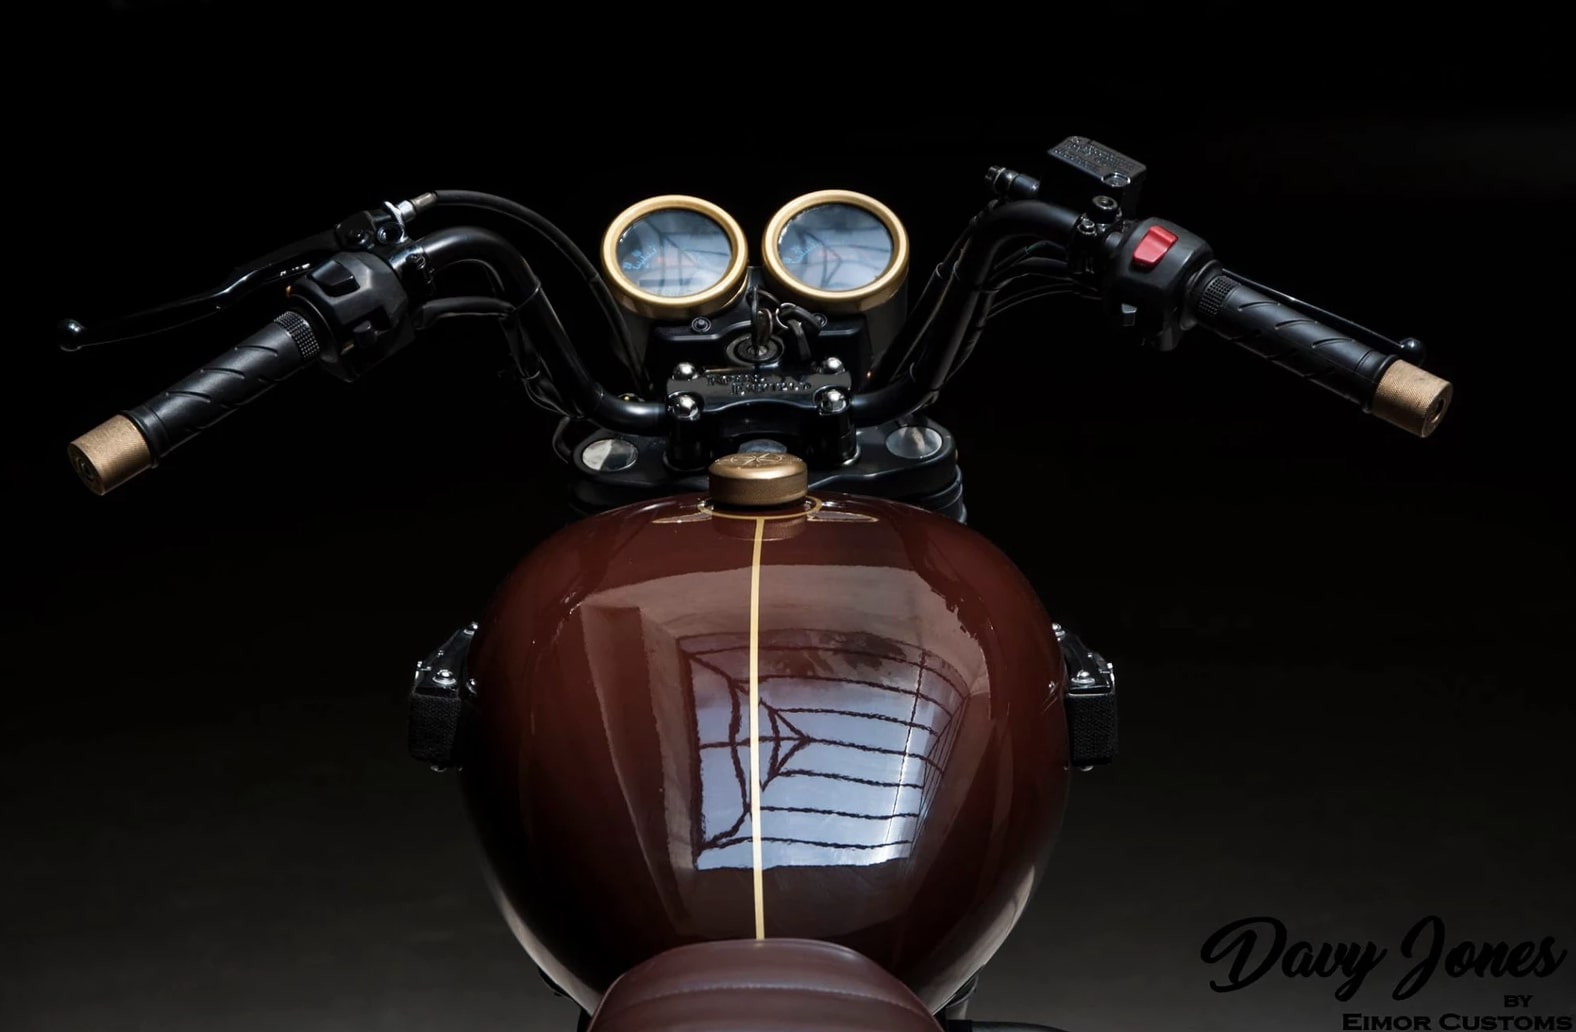 EIMOR Royal Enfield TB 350 Davy Jones Edition Details and Photos - right